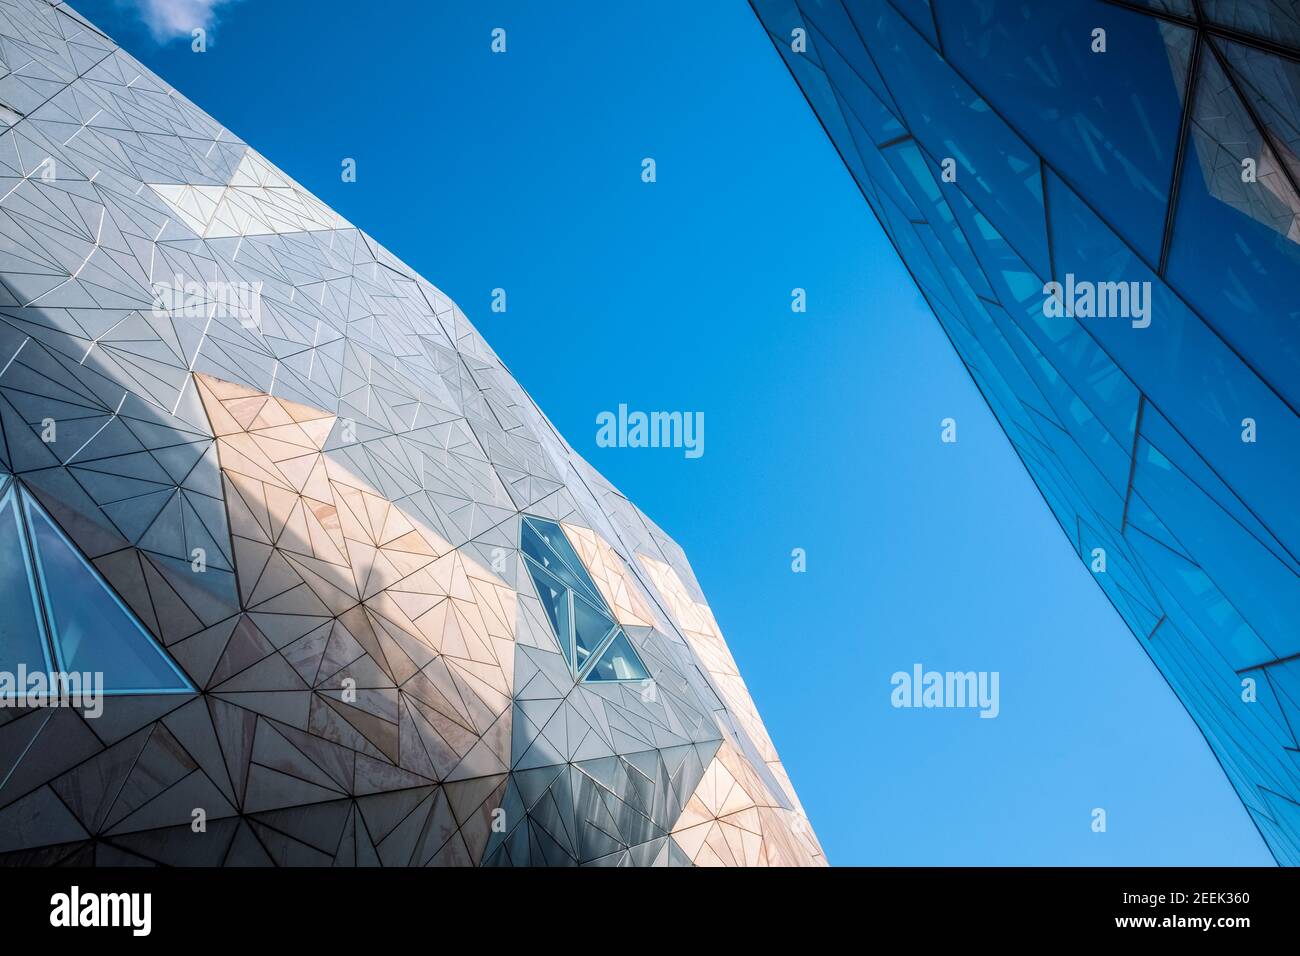 Modern architecture on display at Fed [Federation] Square in Melbourne, Australia Stock Photo